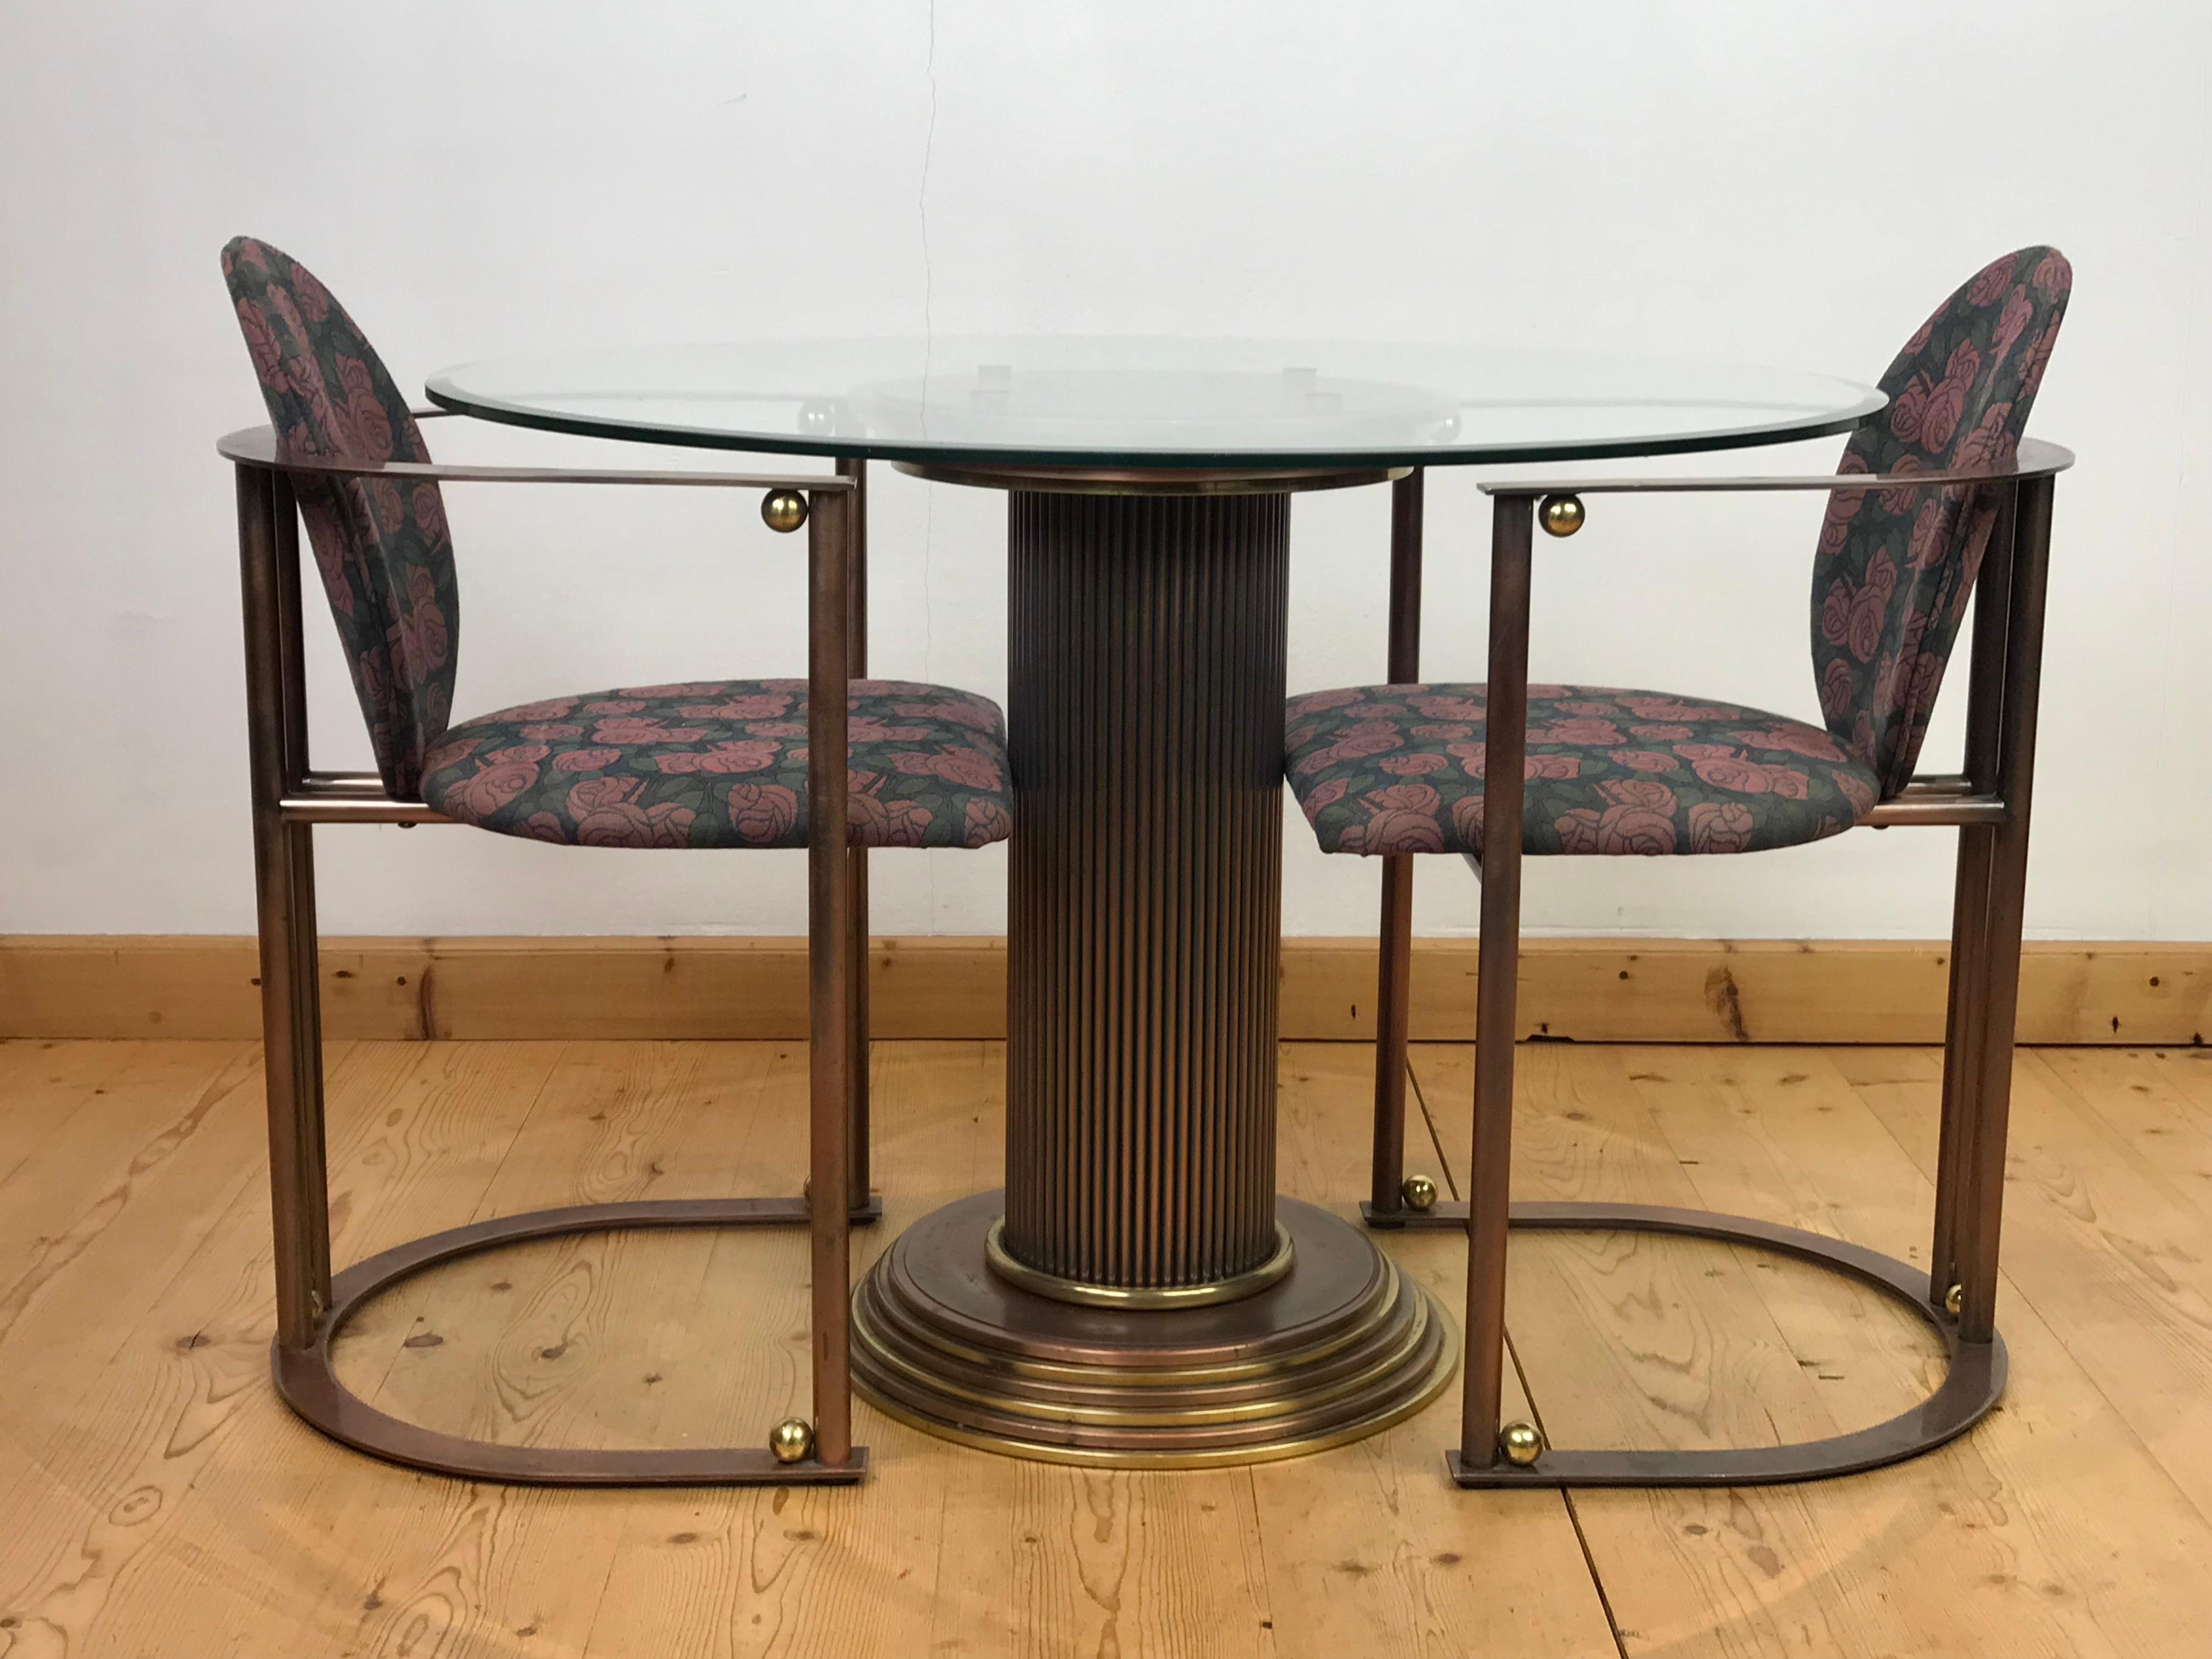 Belgo Chrome Table with 2 Chairs with Roses, 1980s For Sale 12